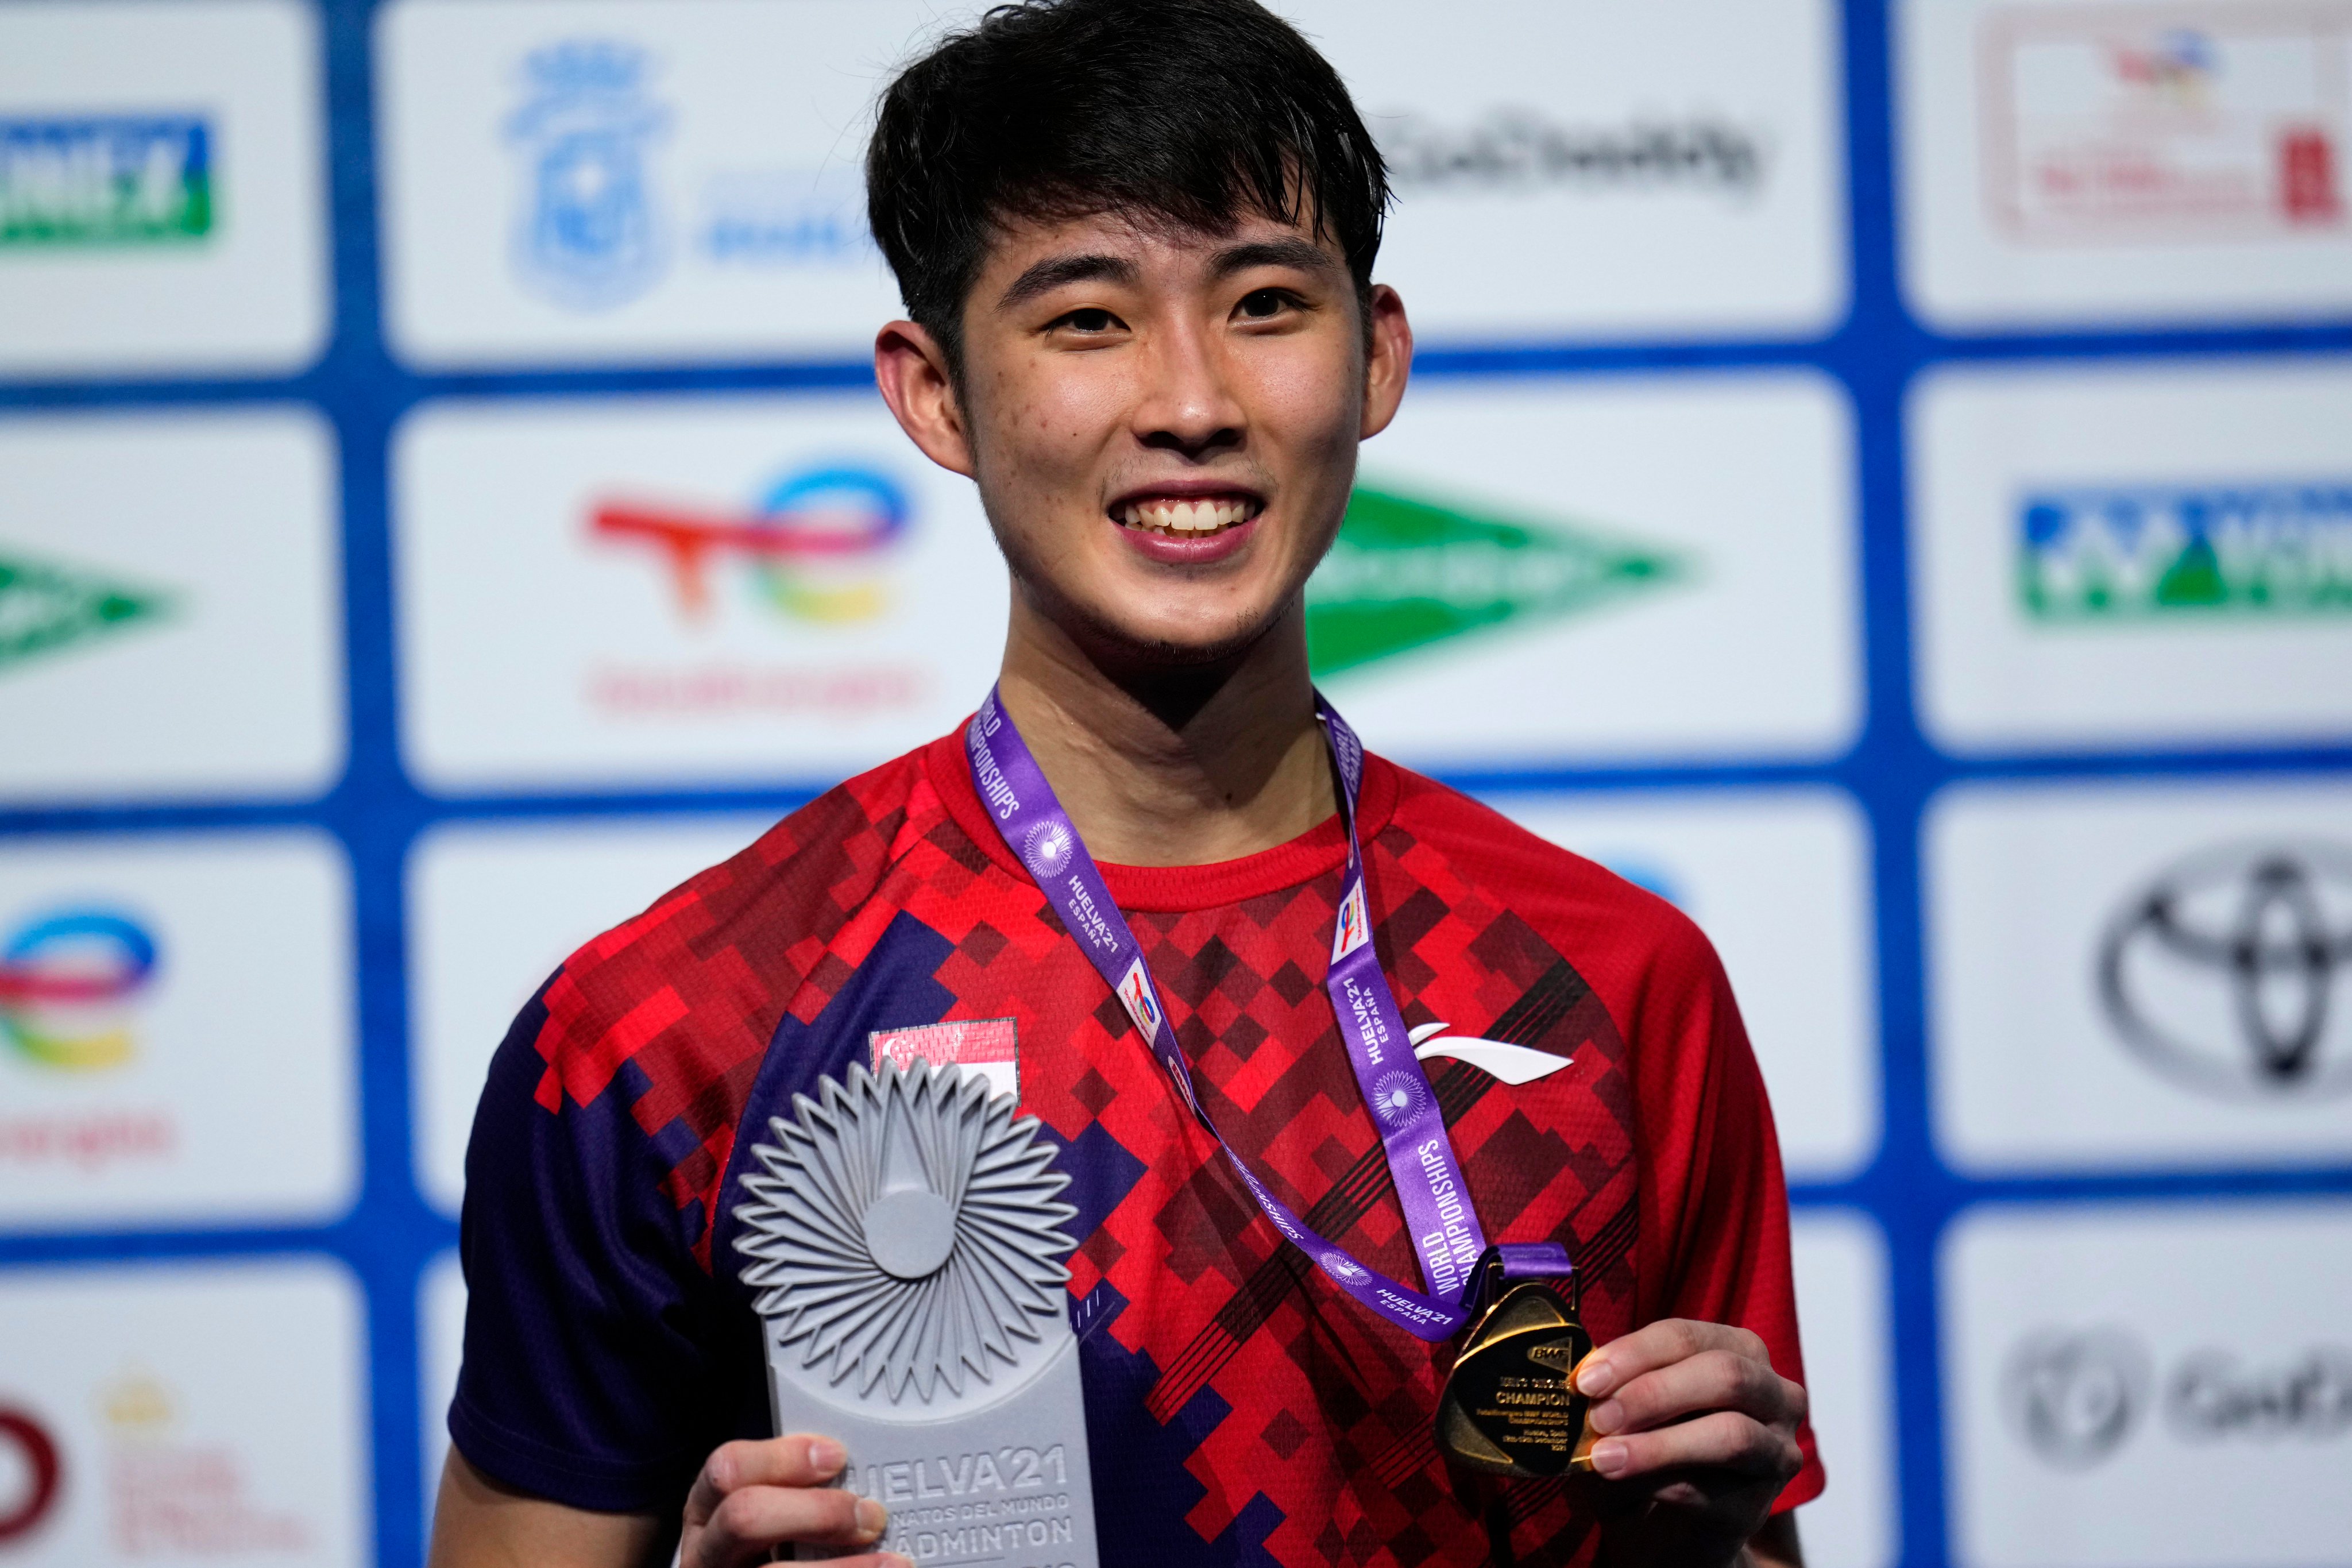 Singapore’s Loh Kean Yew defeated India’s Kidambi Srikanth to win the BWF World Championships in 2021. Photo: AP